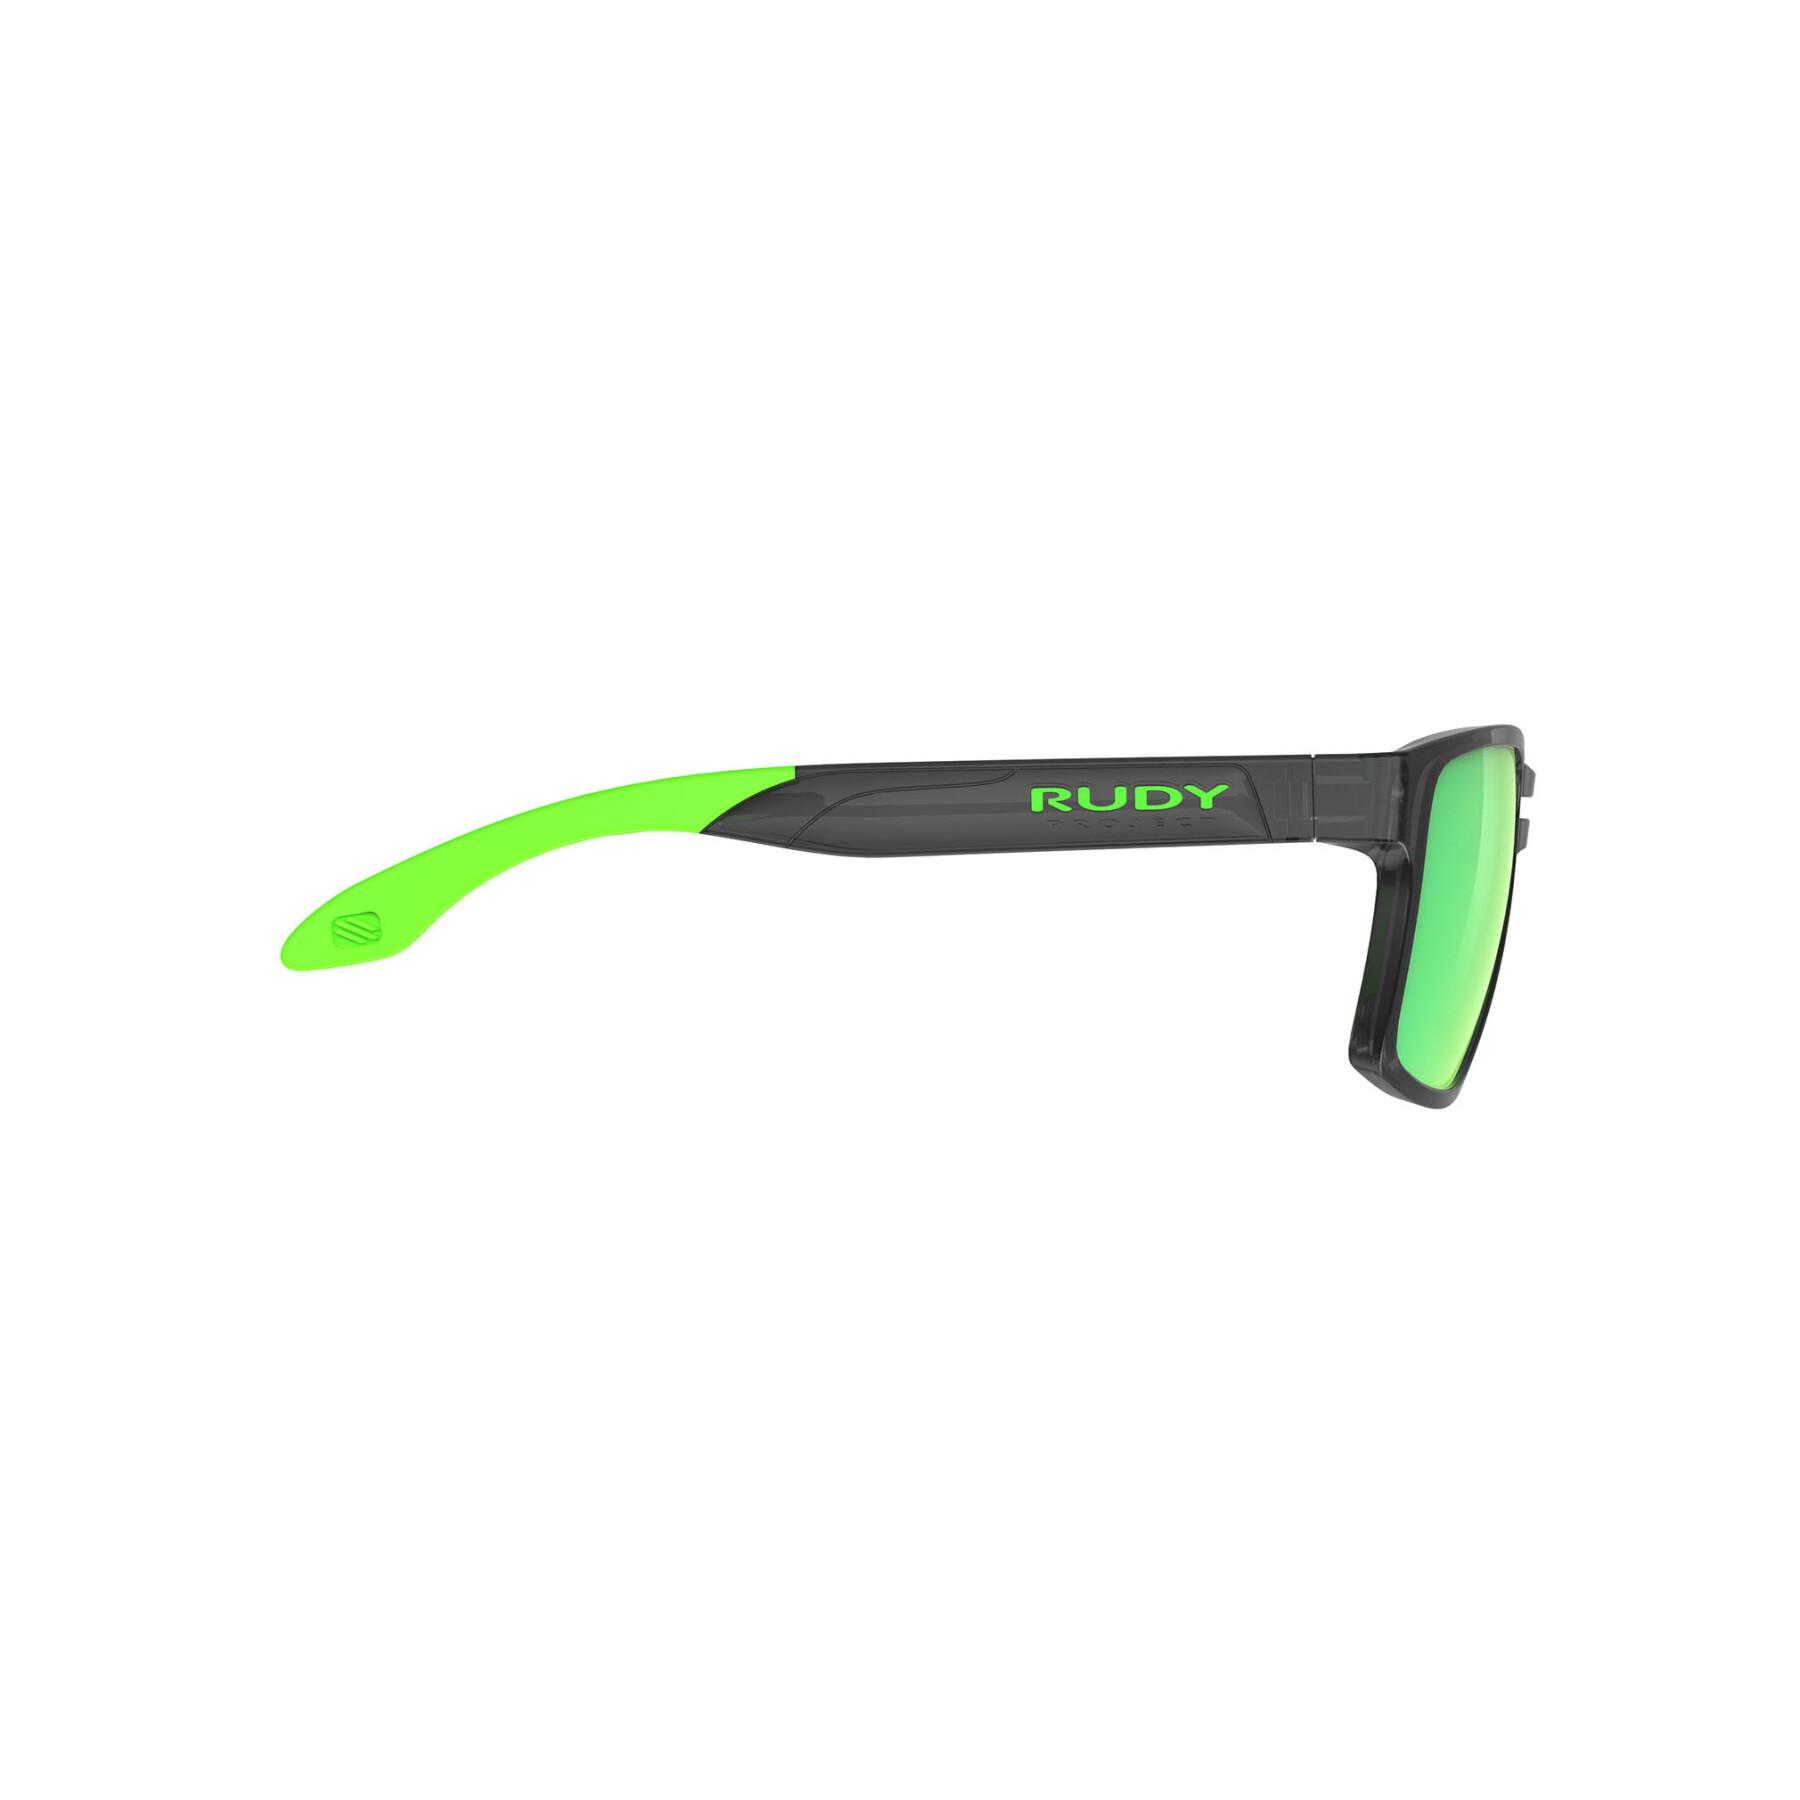 Sunglasses Rudy Project spinair 57 water sports